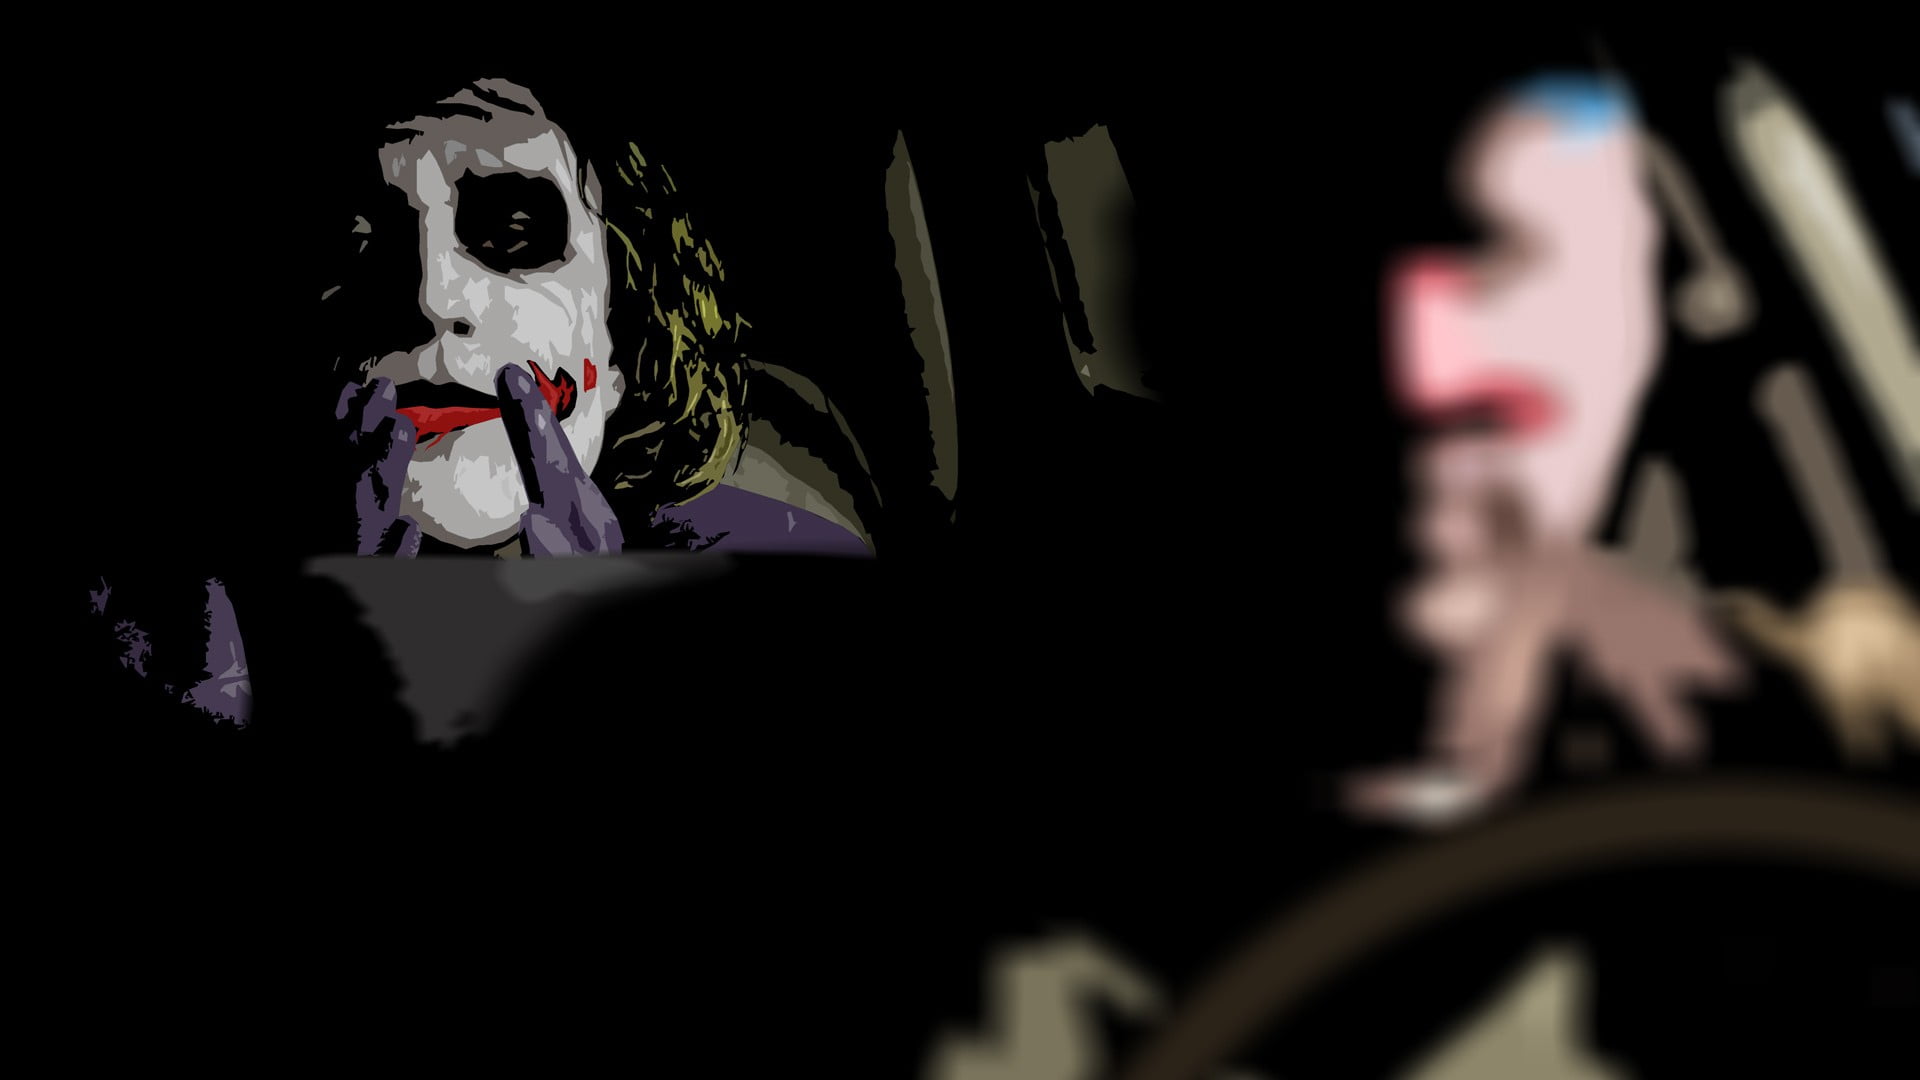 The Joker riding on back of vehicle digital wallpaper, movies